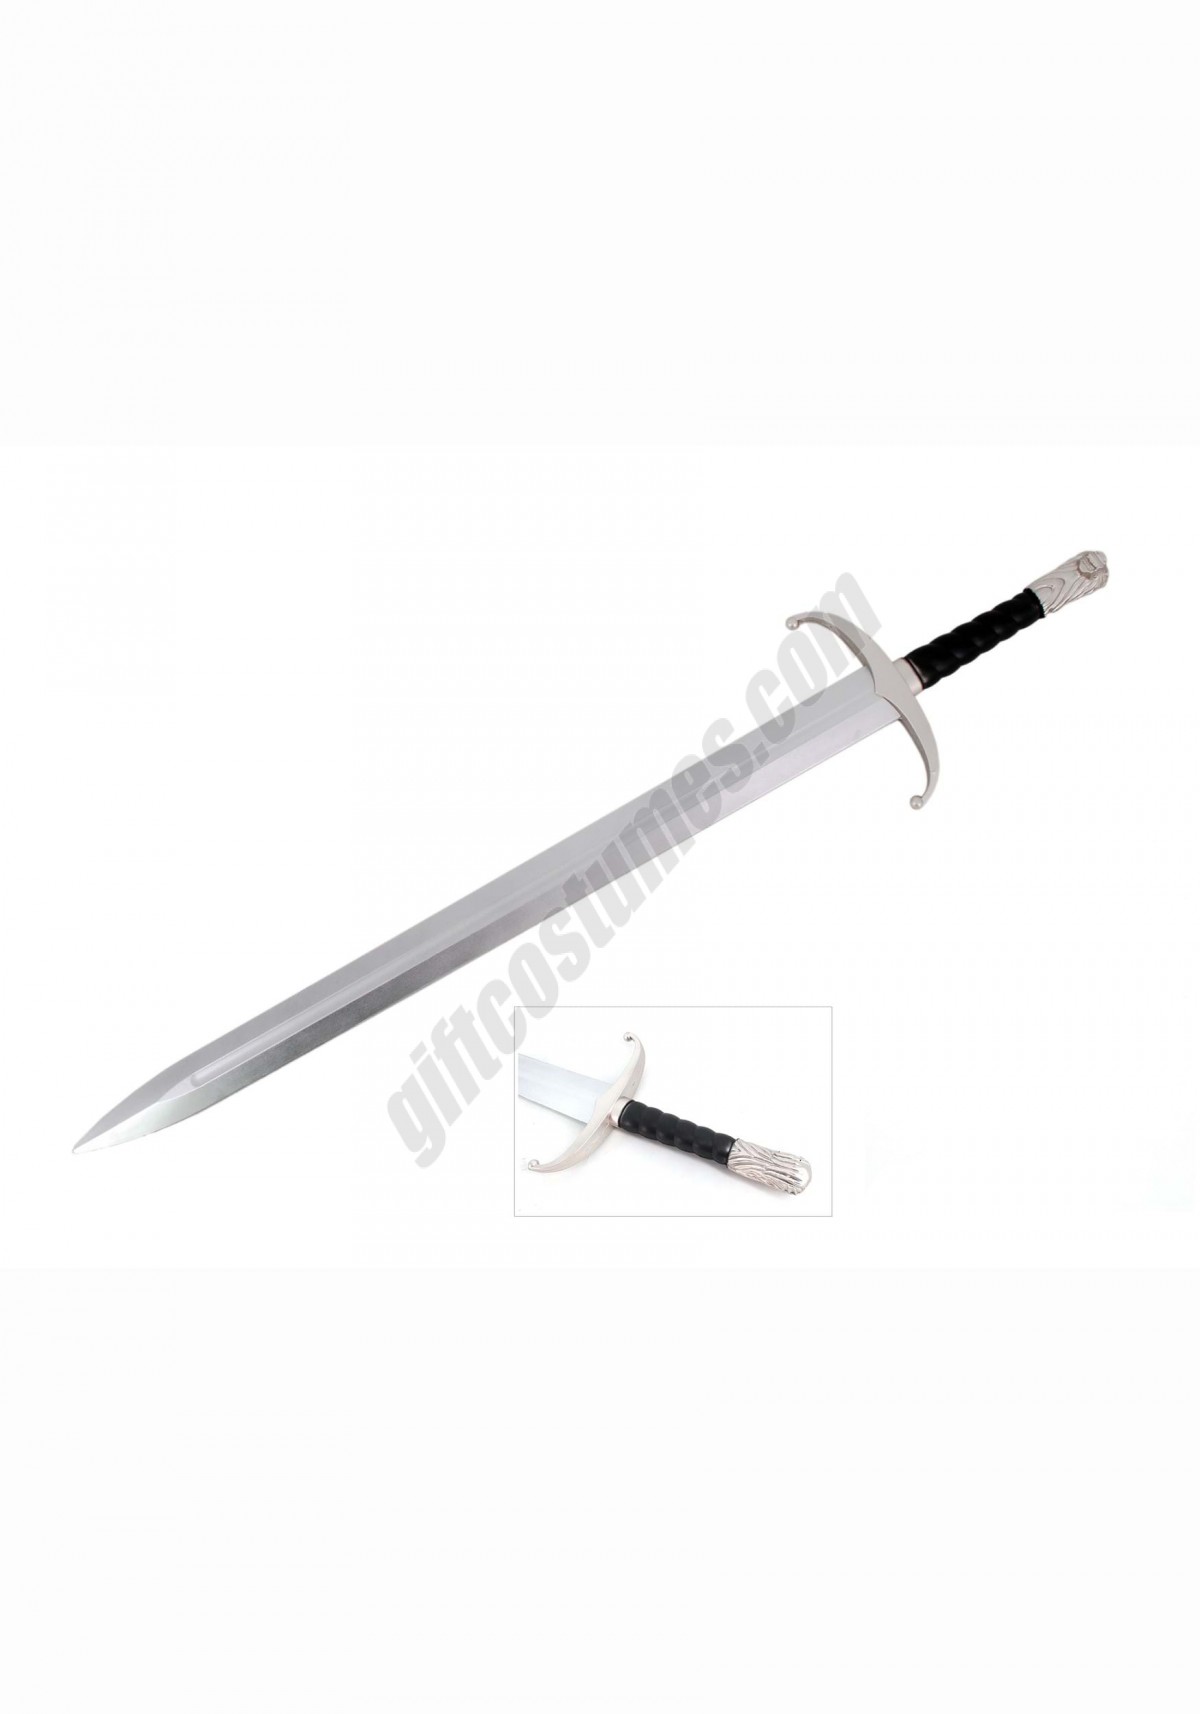 Northern King Sword Costume Accessory Promotions - -0